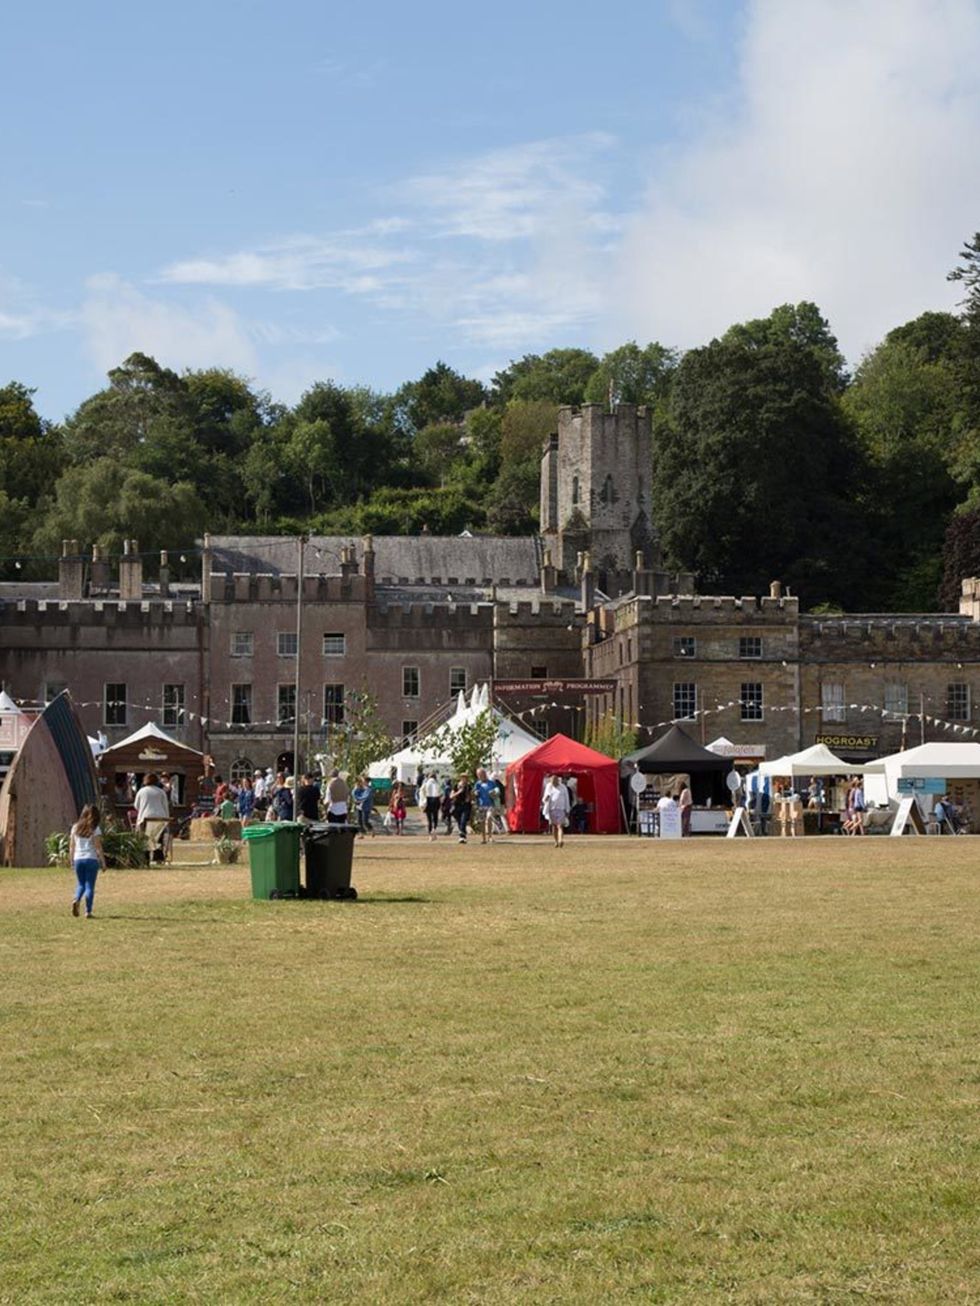 One thousand years old, each year Port Eliot throws open its doors for a four-day celebration of fashion, music, literature and food.